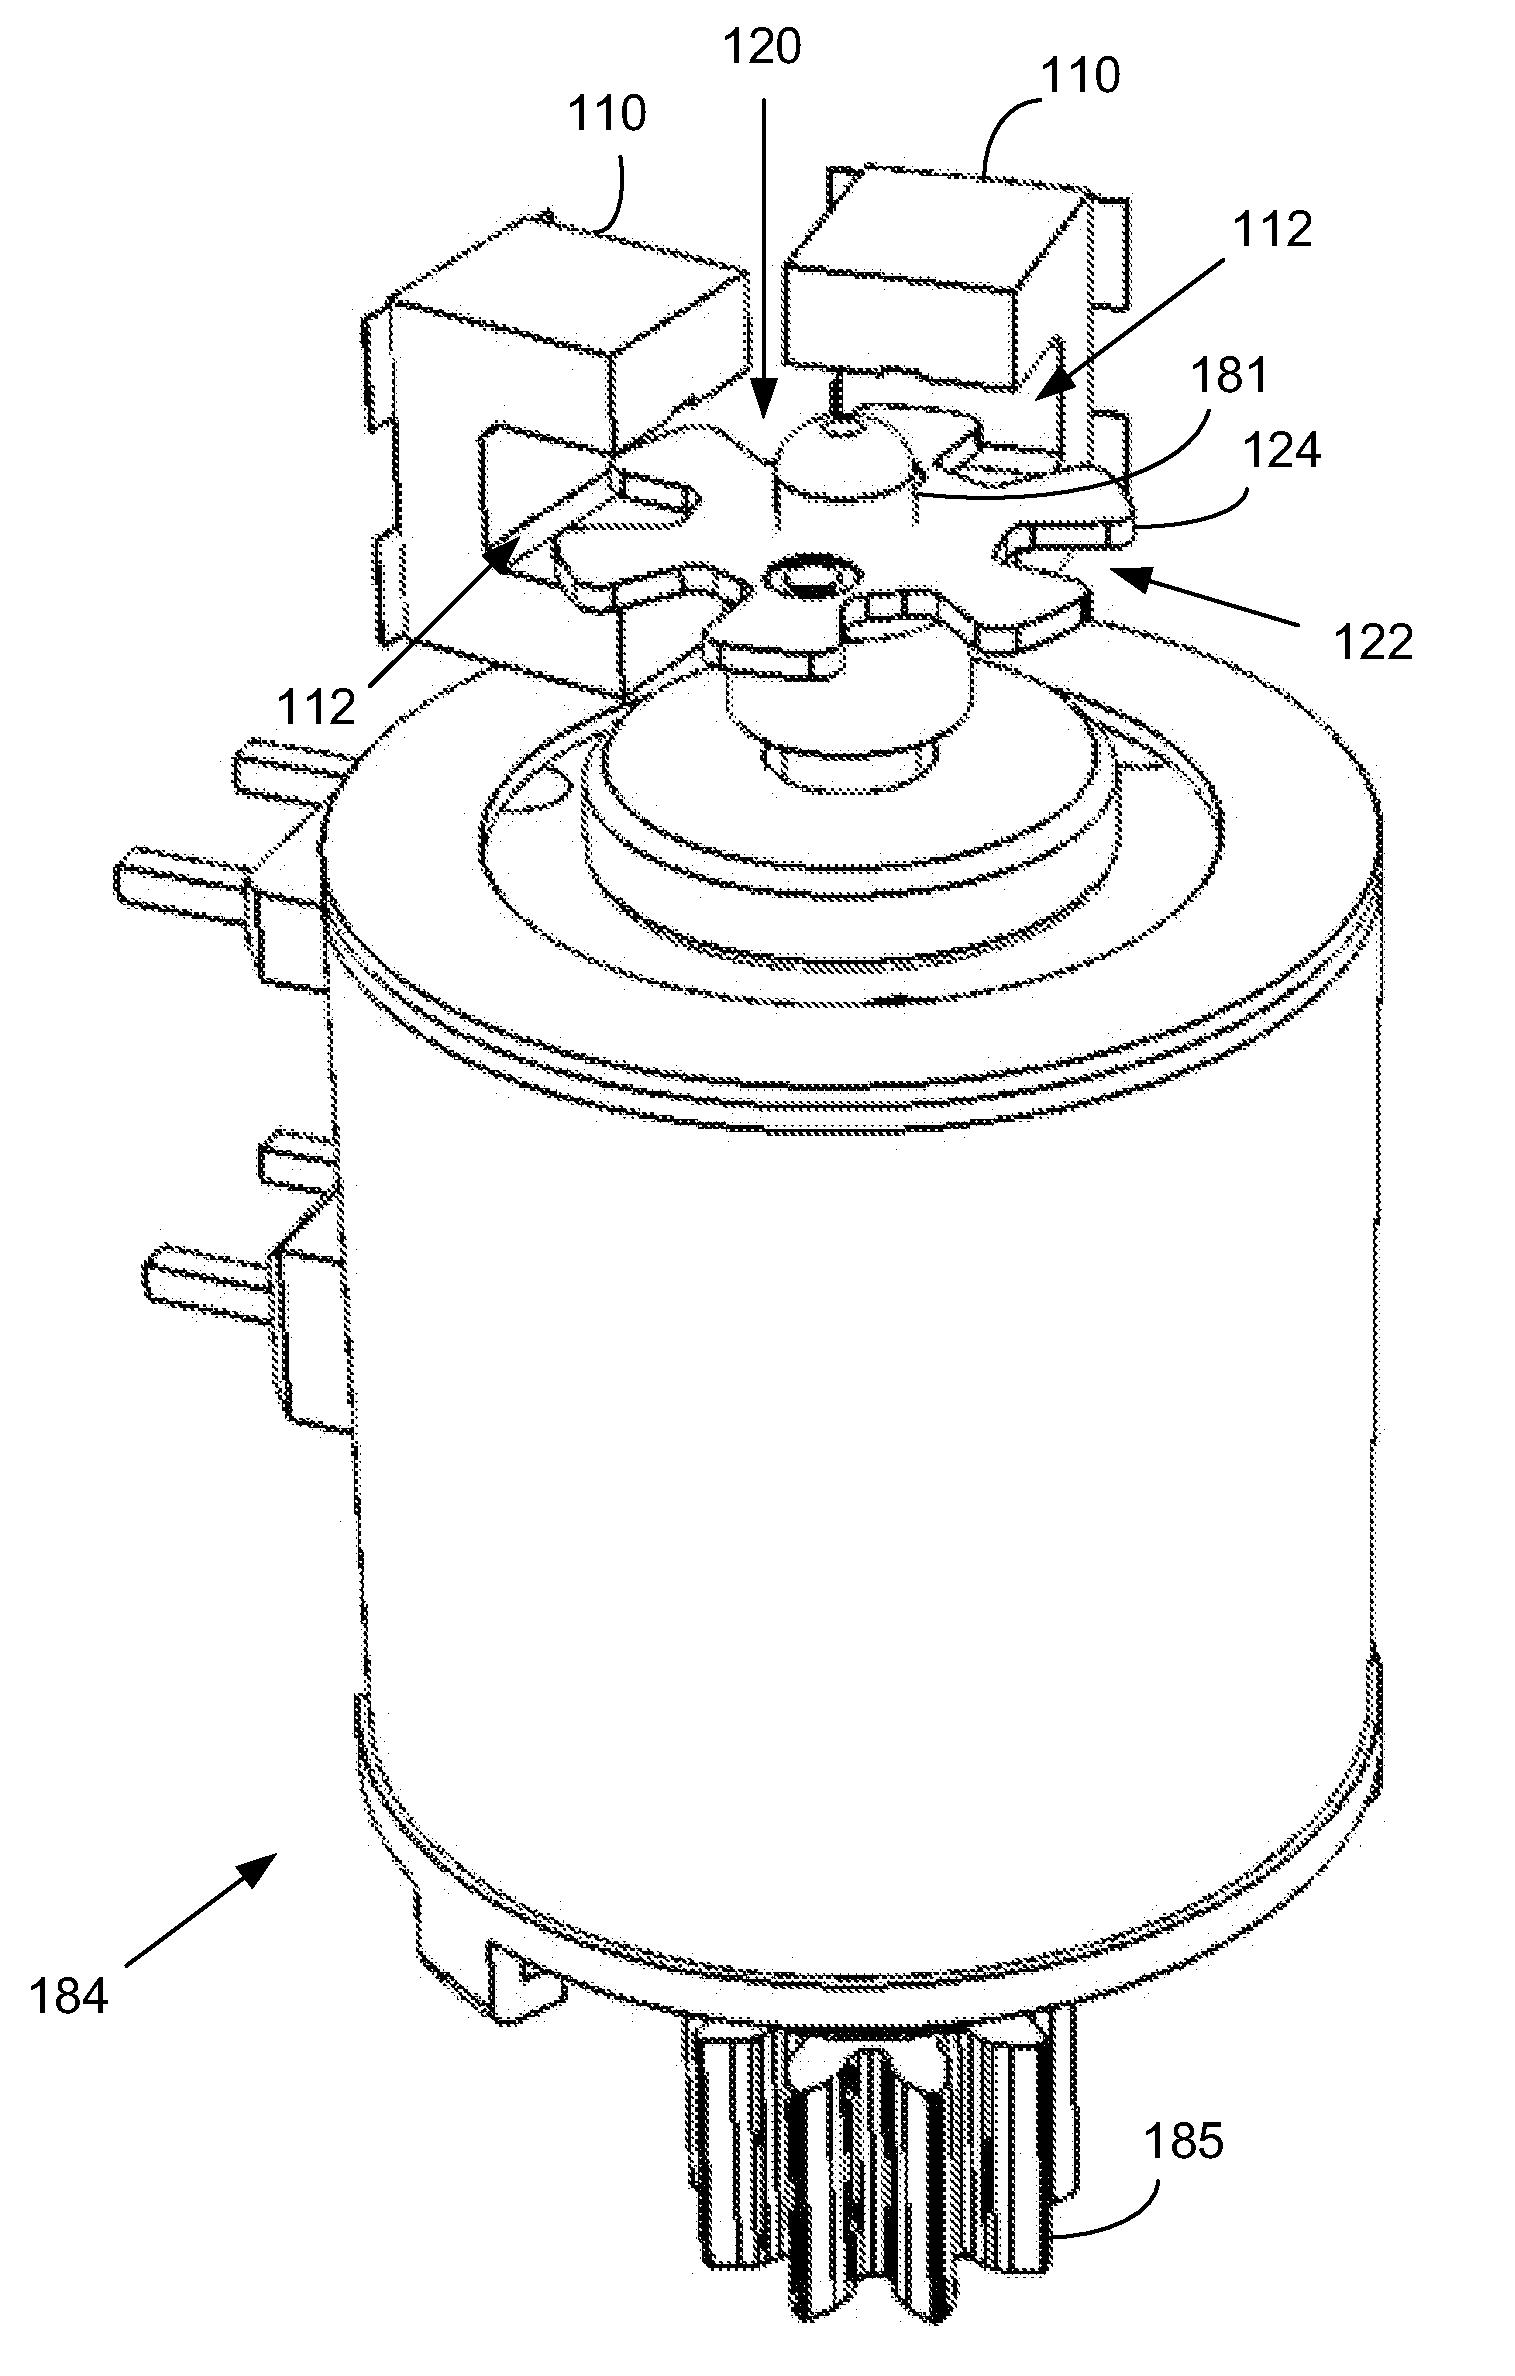 Motor assembly sensor capture systems and methods